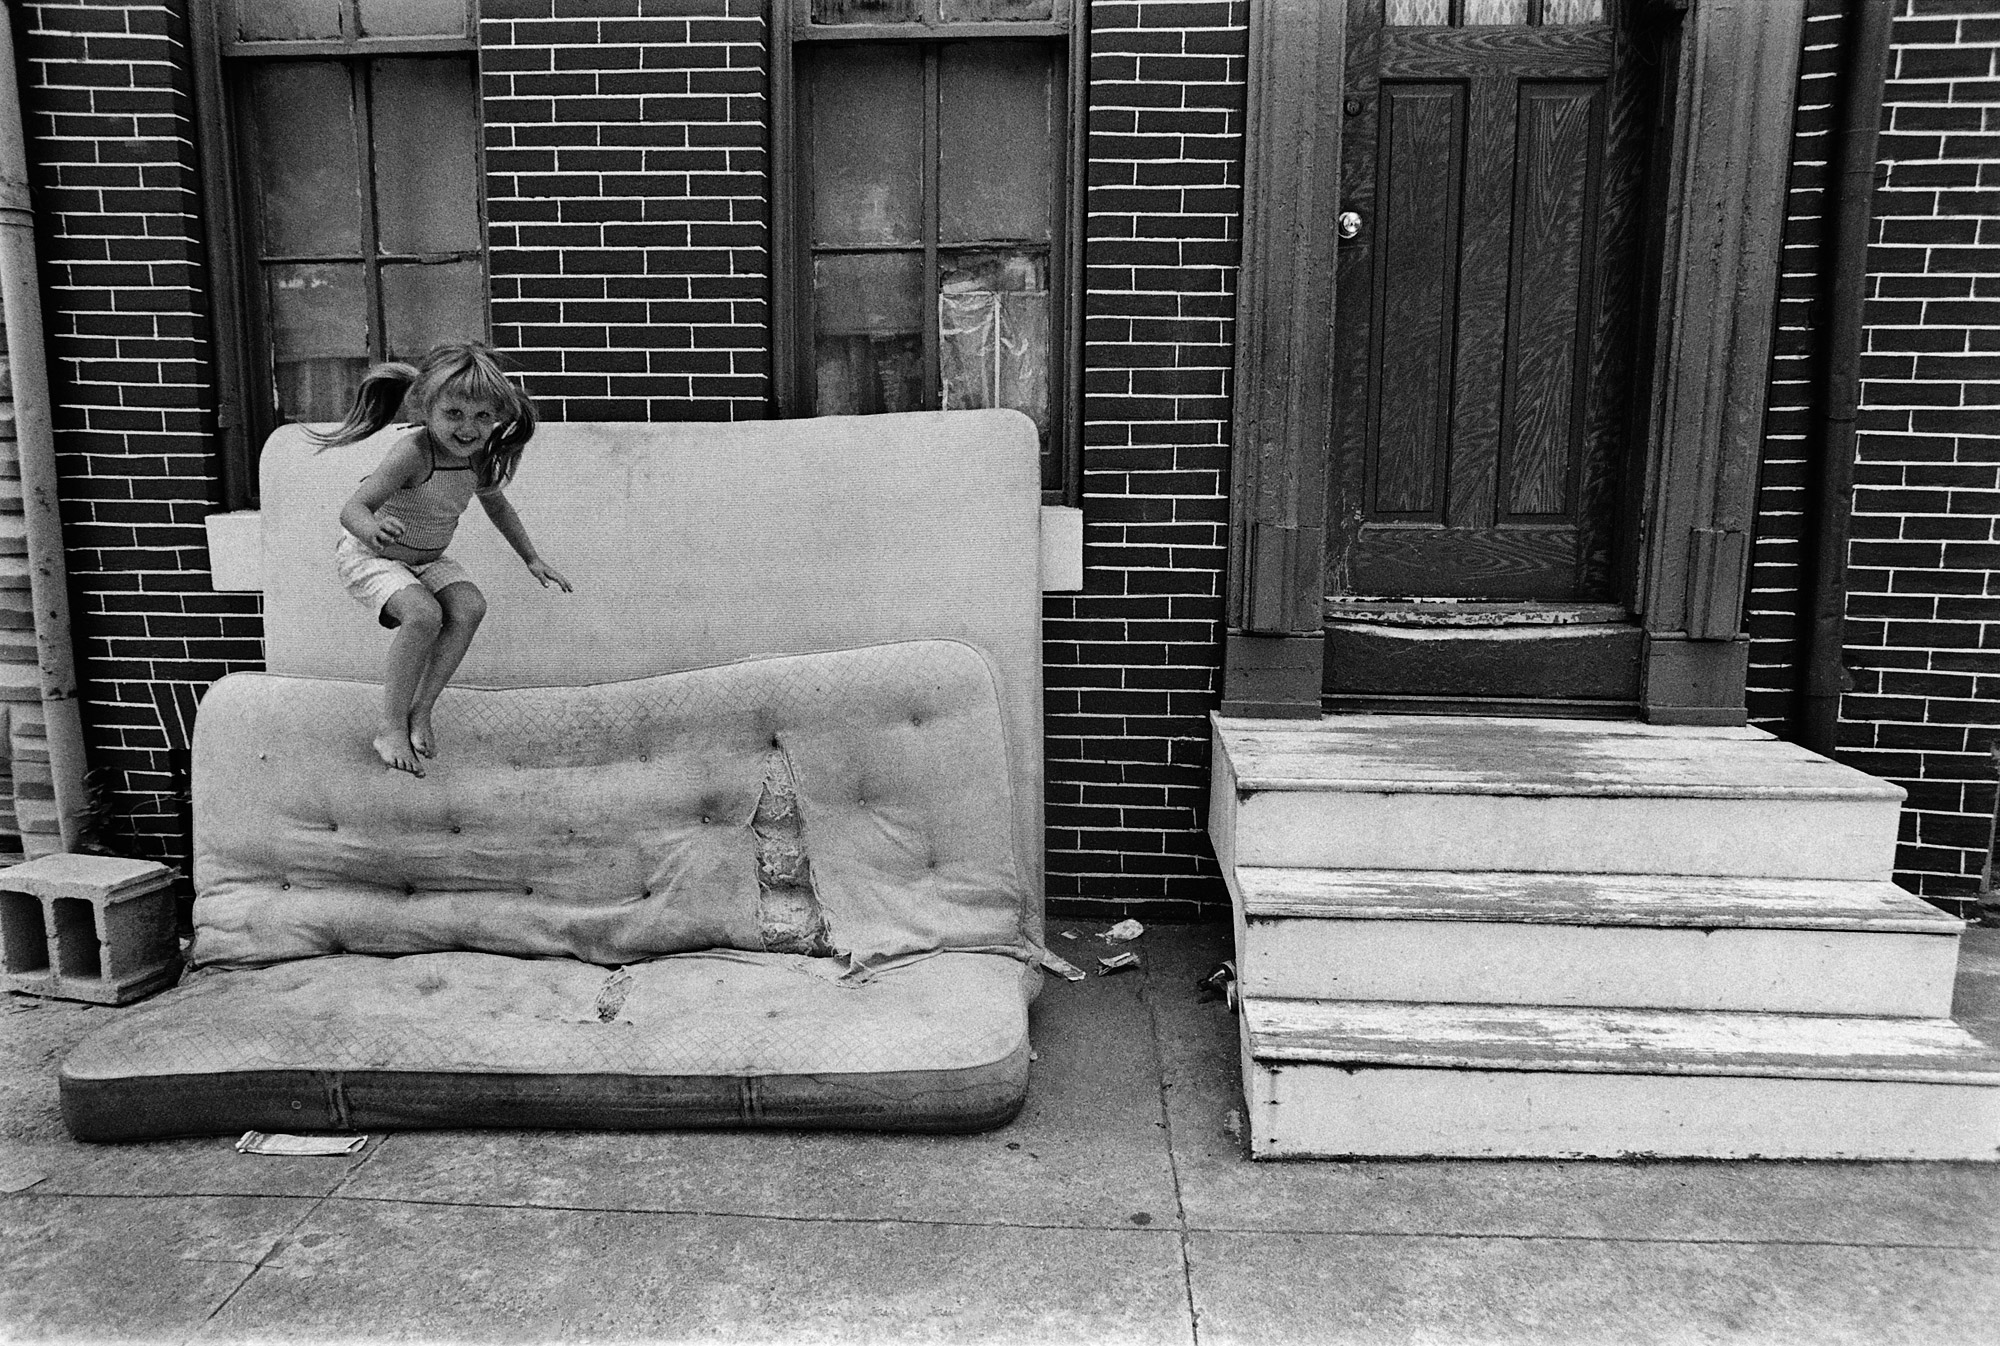 photograph of girl jumping on dirty mattress in Baltimore City